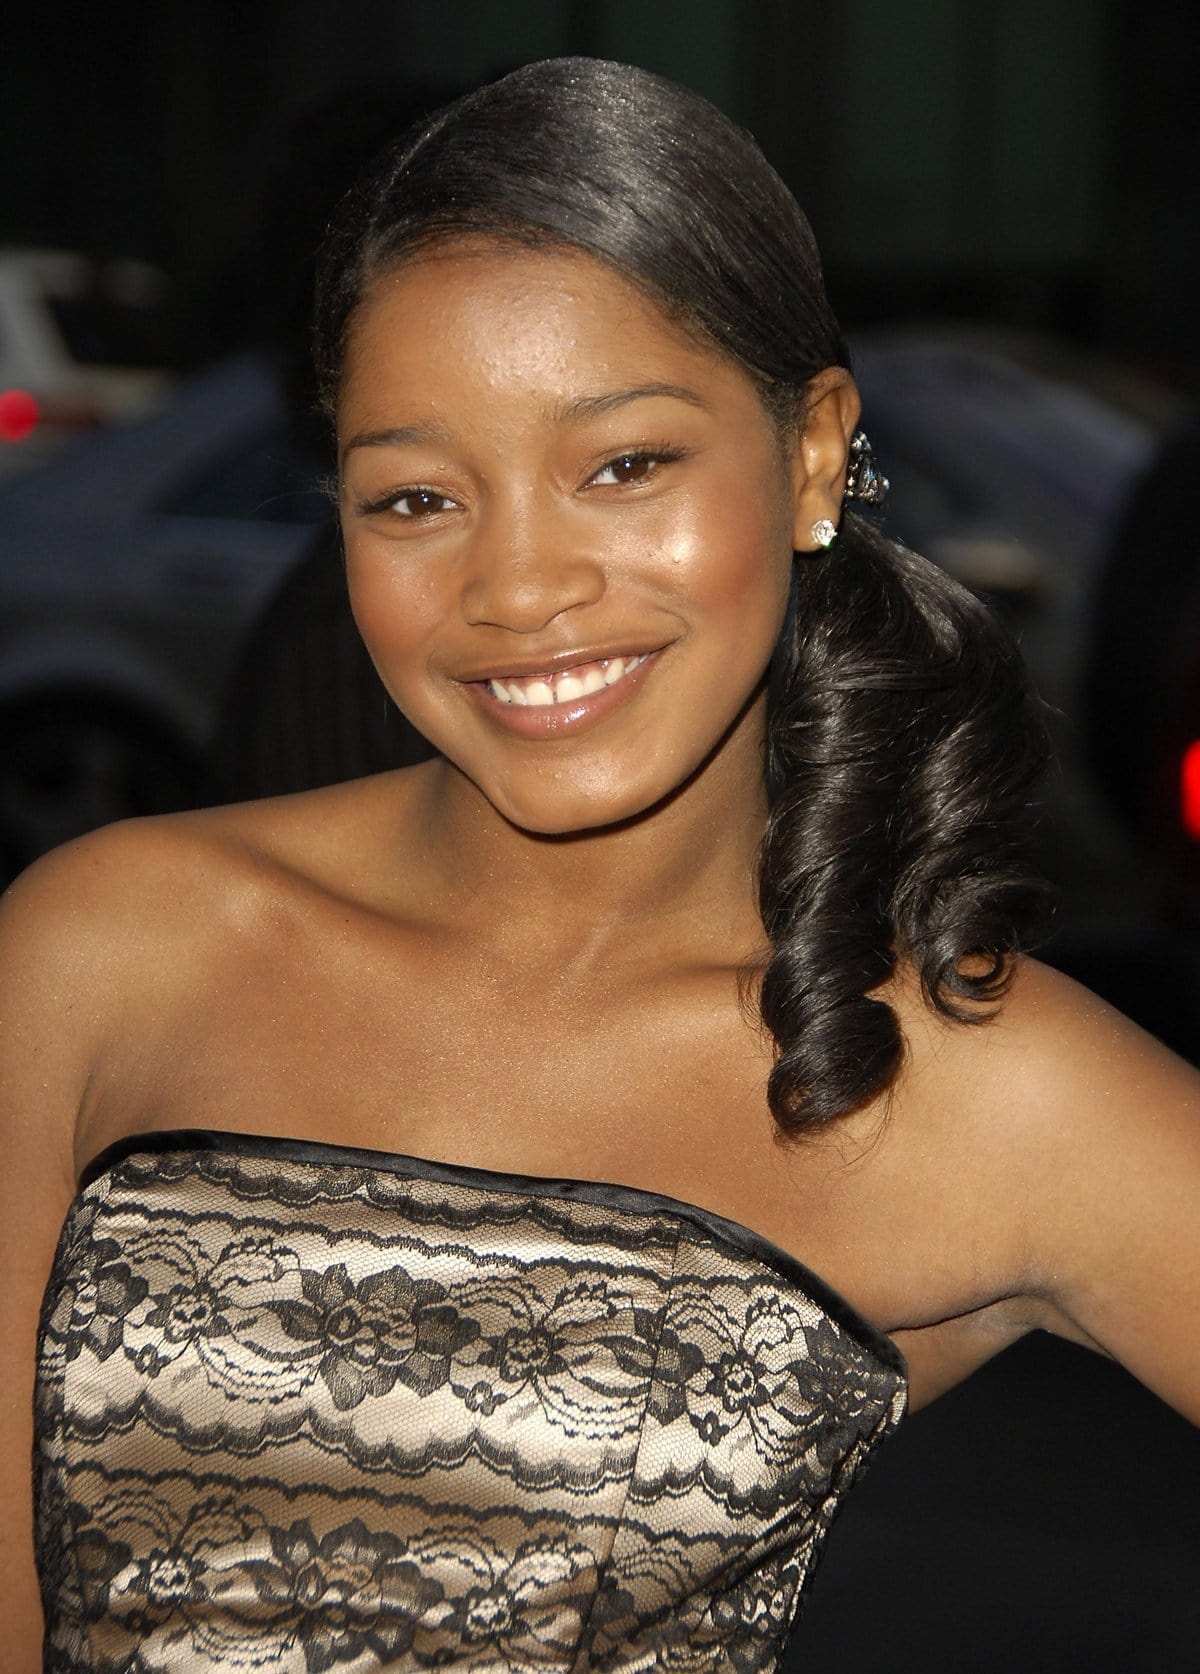 Keke Palmer attends the "Akeelah and the Bee" Los Angeles premiere at The Academy of Motion Picture Arts and Sciences